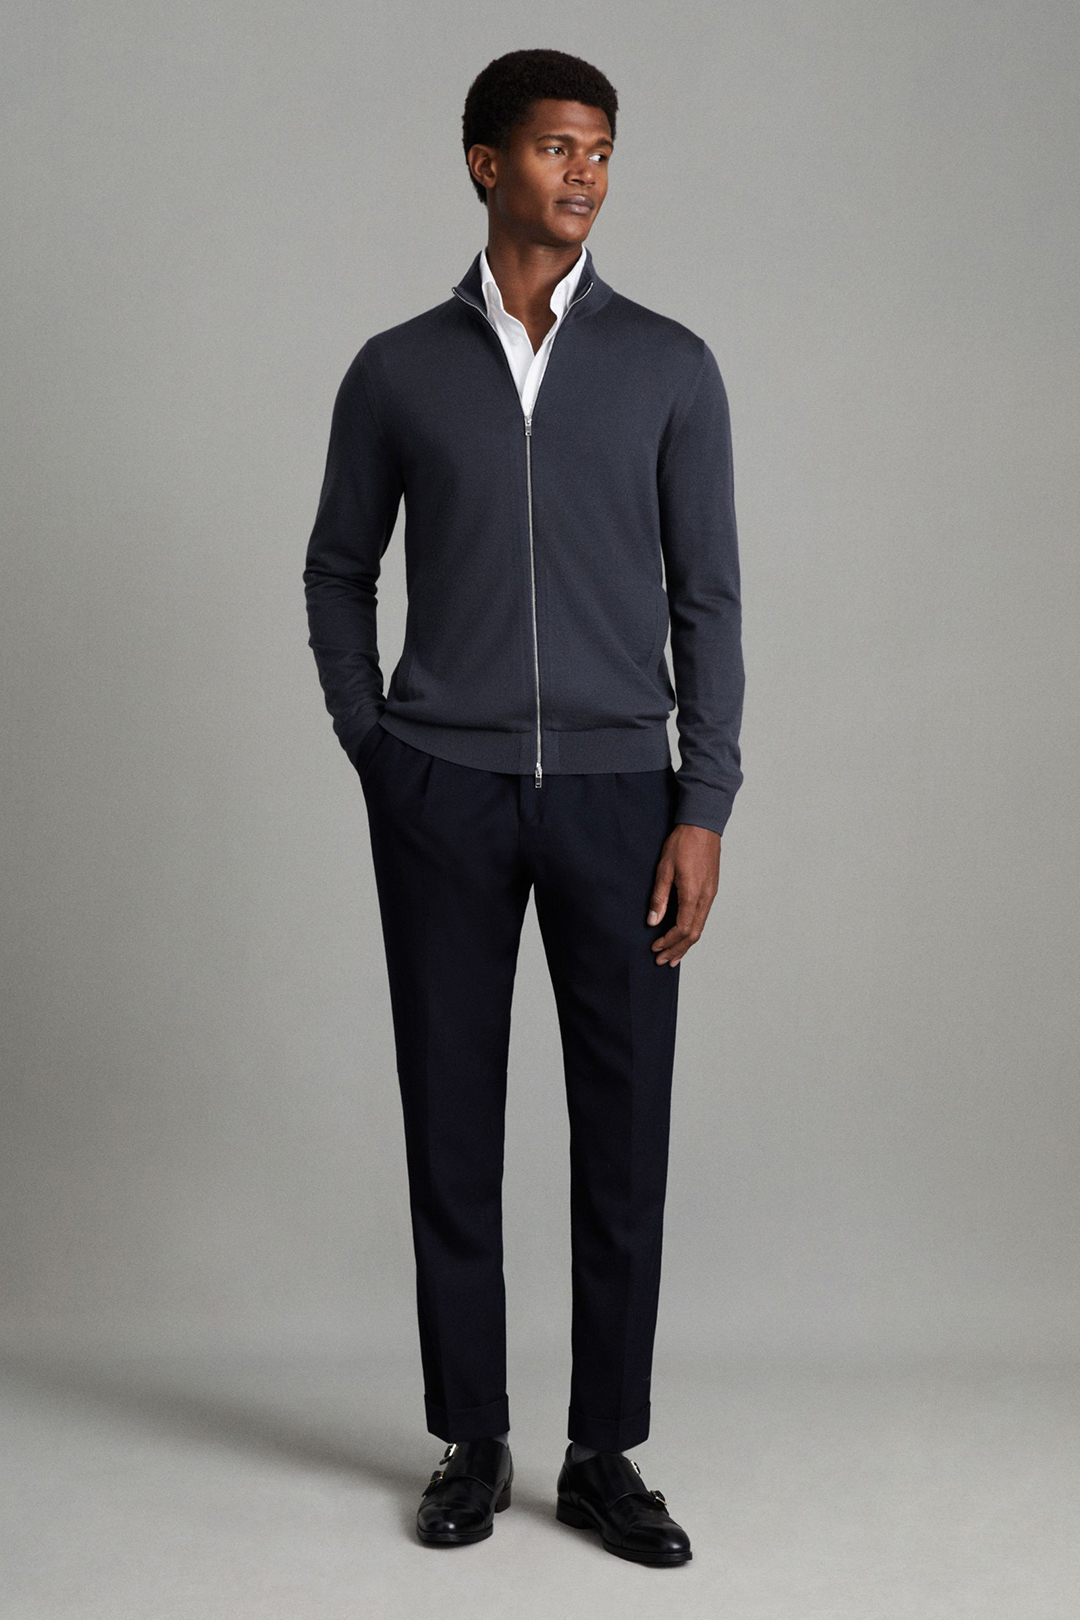 Blue zip front cardigan sweater, white dress shirt, navy chinos, and black double monks outfit